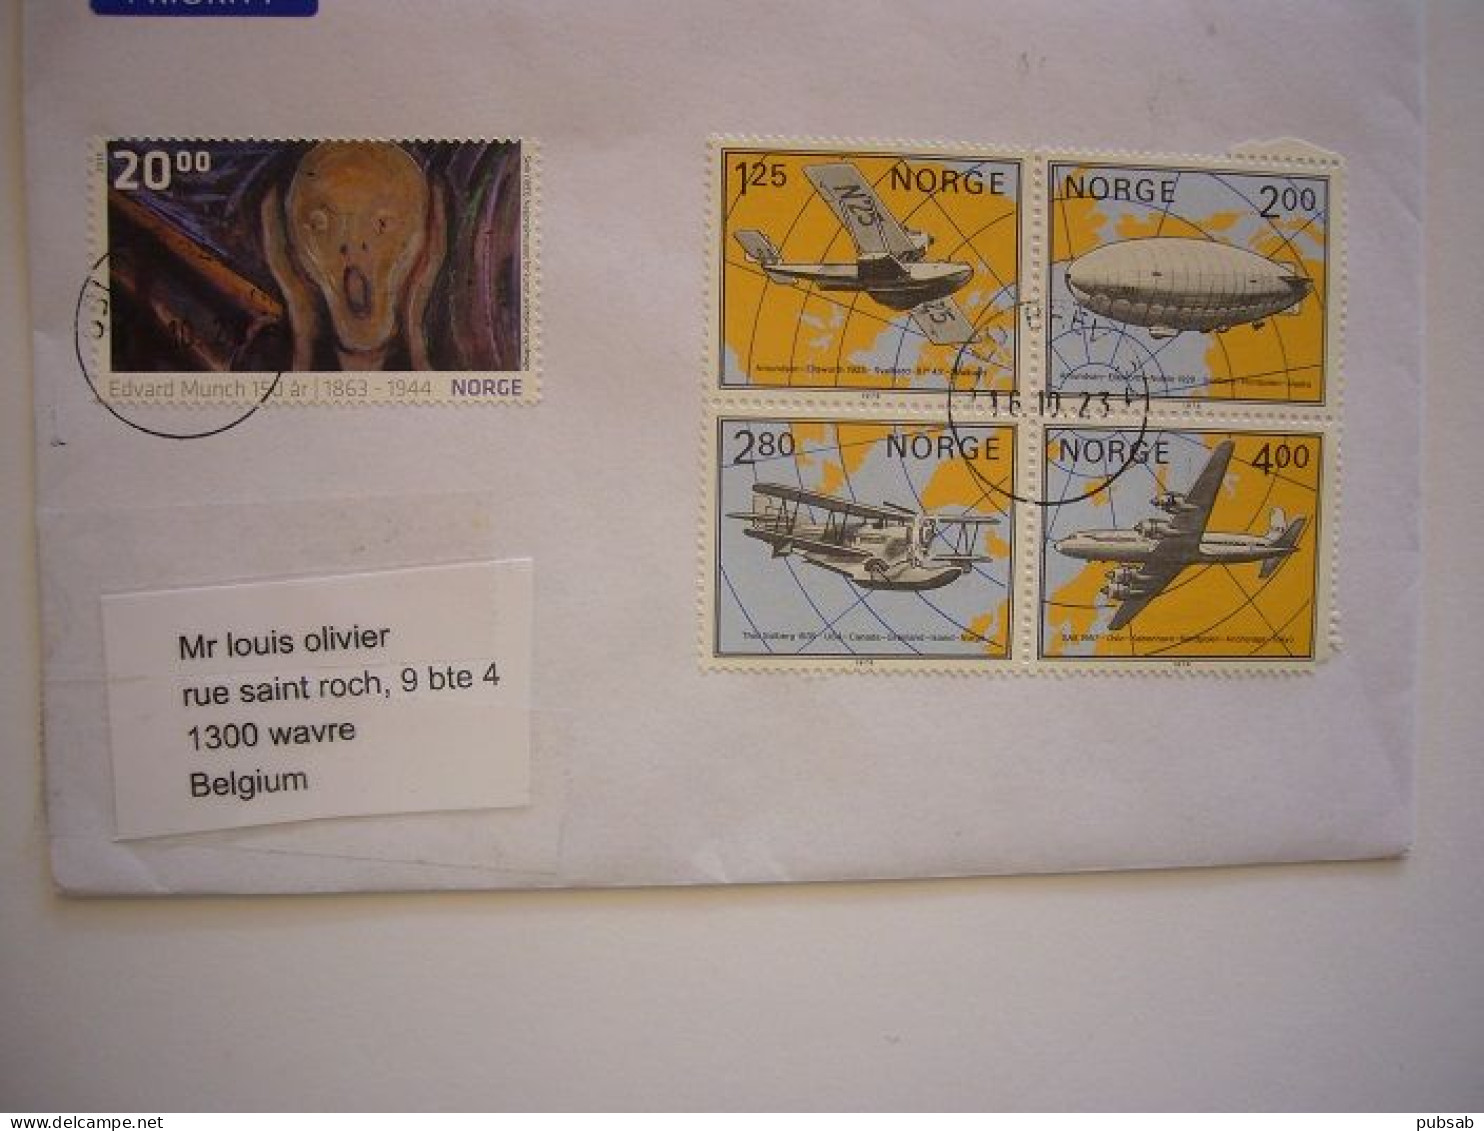 Avion / Airplane / NORGE / Letter From Rolvsoy, Fredrikstad To Wavre, Belgium / Airline Stamps - Brieven En Documenten